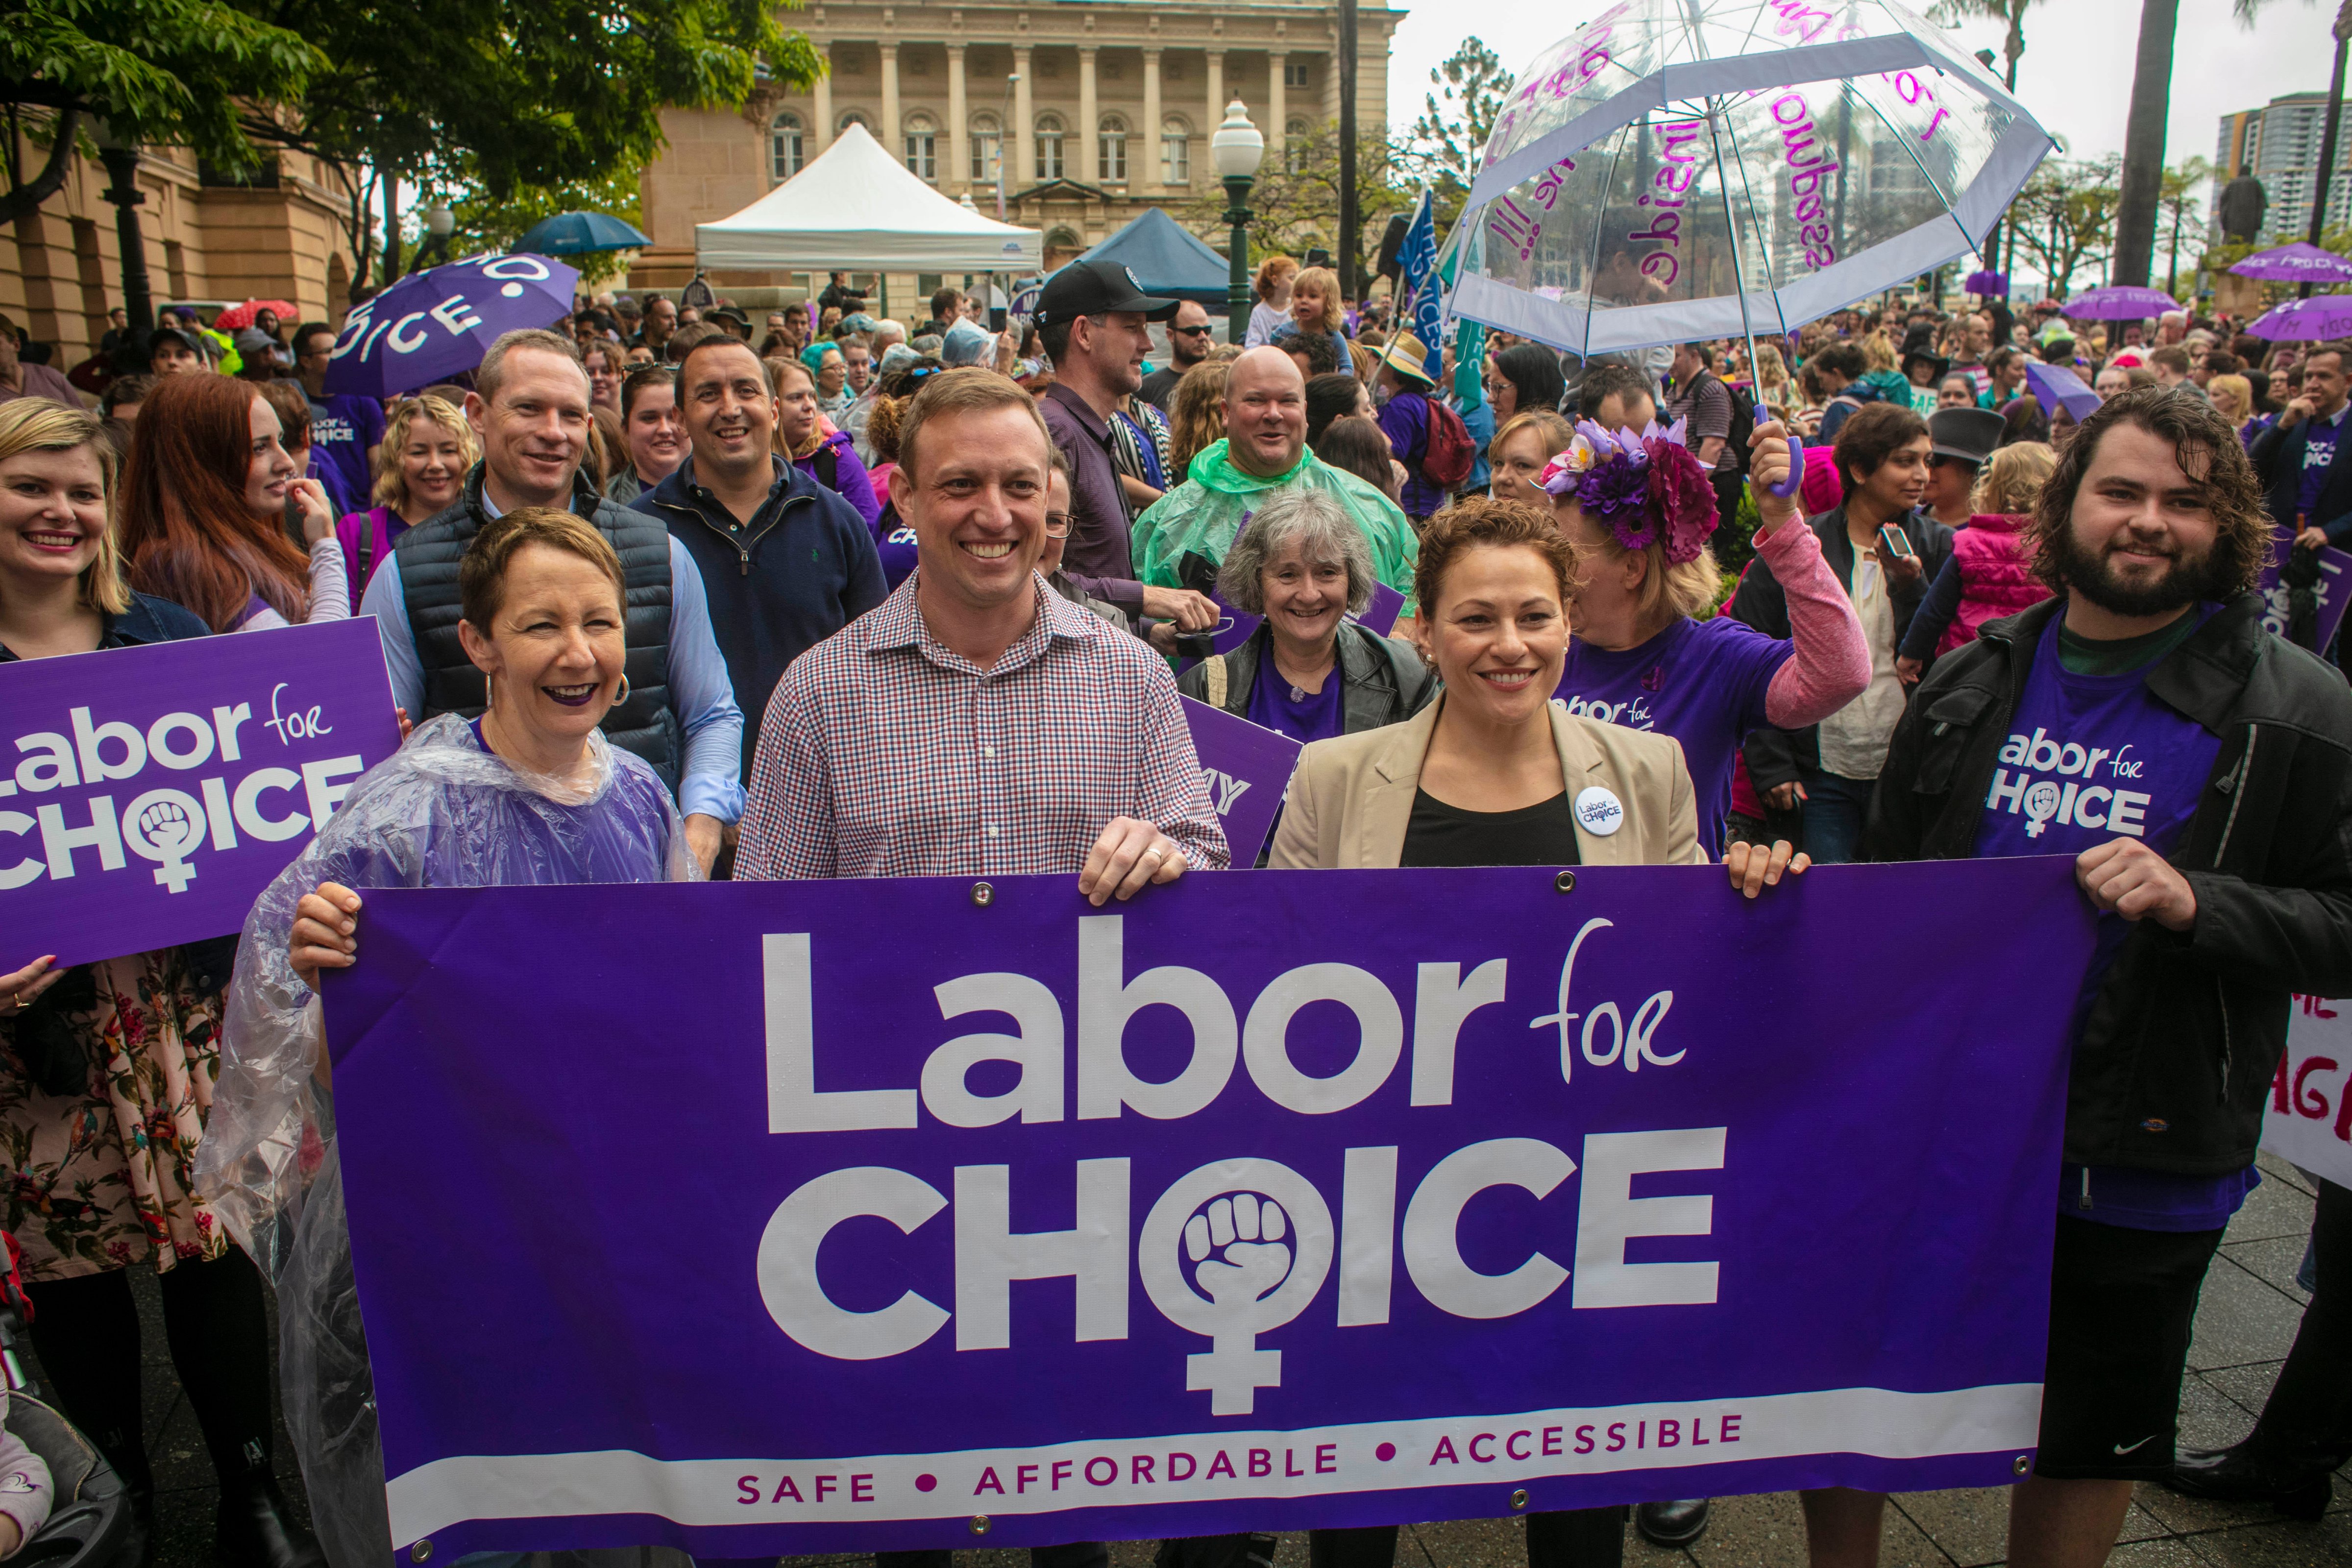 Queensland Health Minister Steven Miles (second left) and Deputy Premier Jackie Trad (third left) attend the March together for Choice rally ahead of proposed changes to Queensland's abortion laws in Brisbane, Australia, on Oct. 14, 2018. (Glenn Hunt—EPA-EFE)